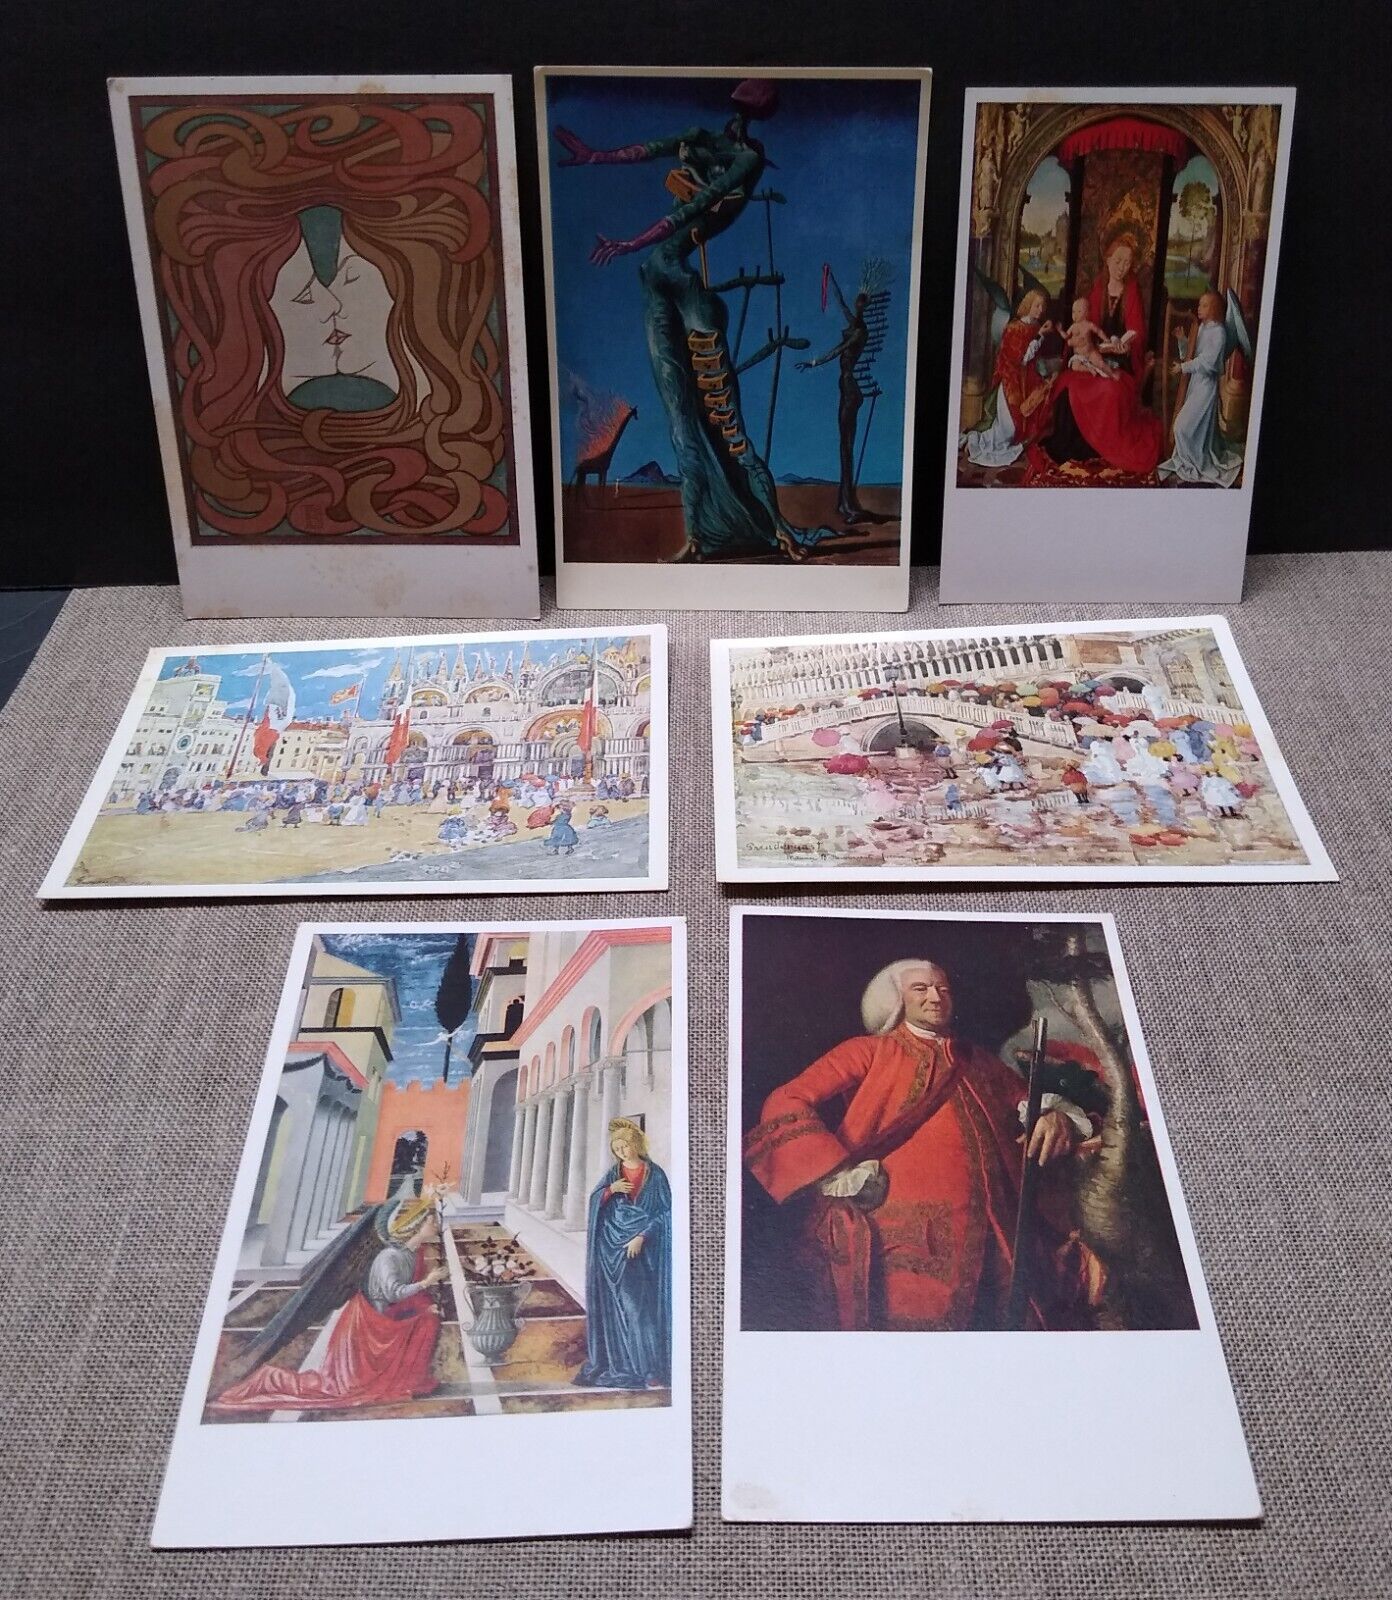 Lot of 7 Vintage Museum Art Post Cards, The Burning Giraffe, The Kiss, Madonna